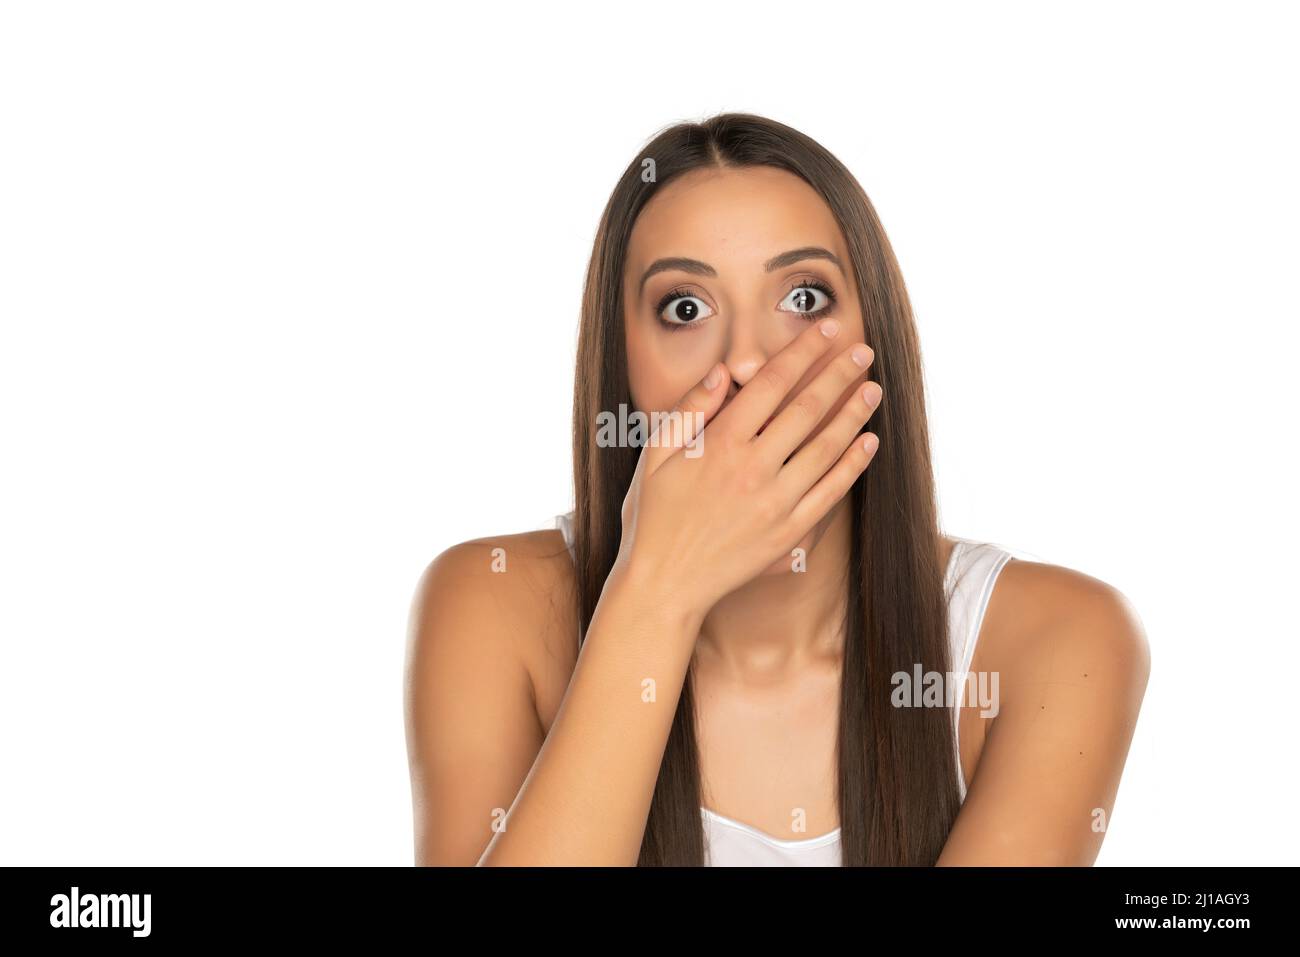 Shocked young woman covers her mouth with her hands on a white background Stock Photo